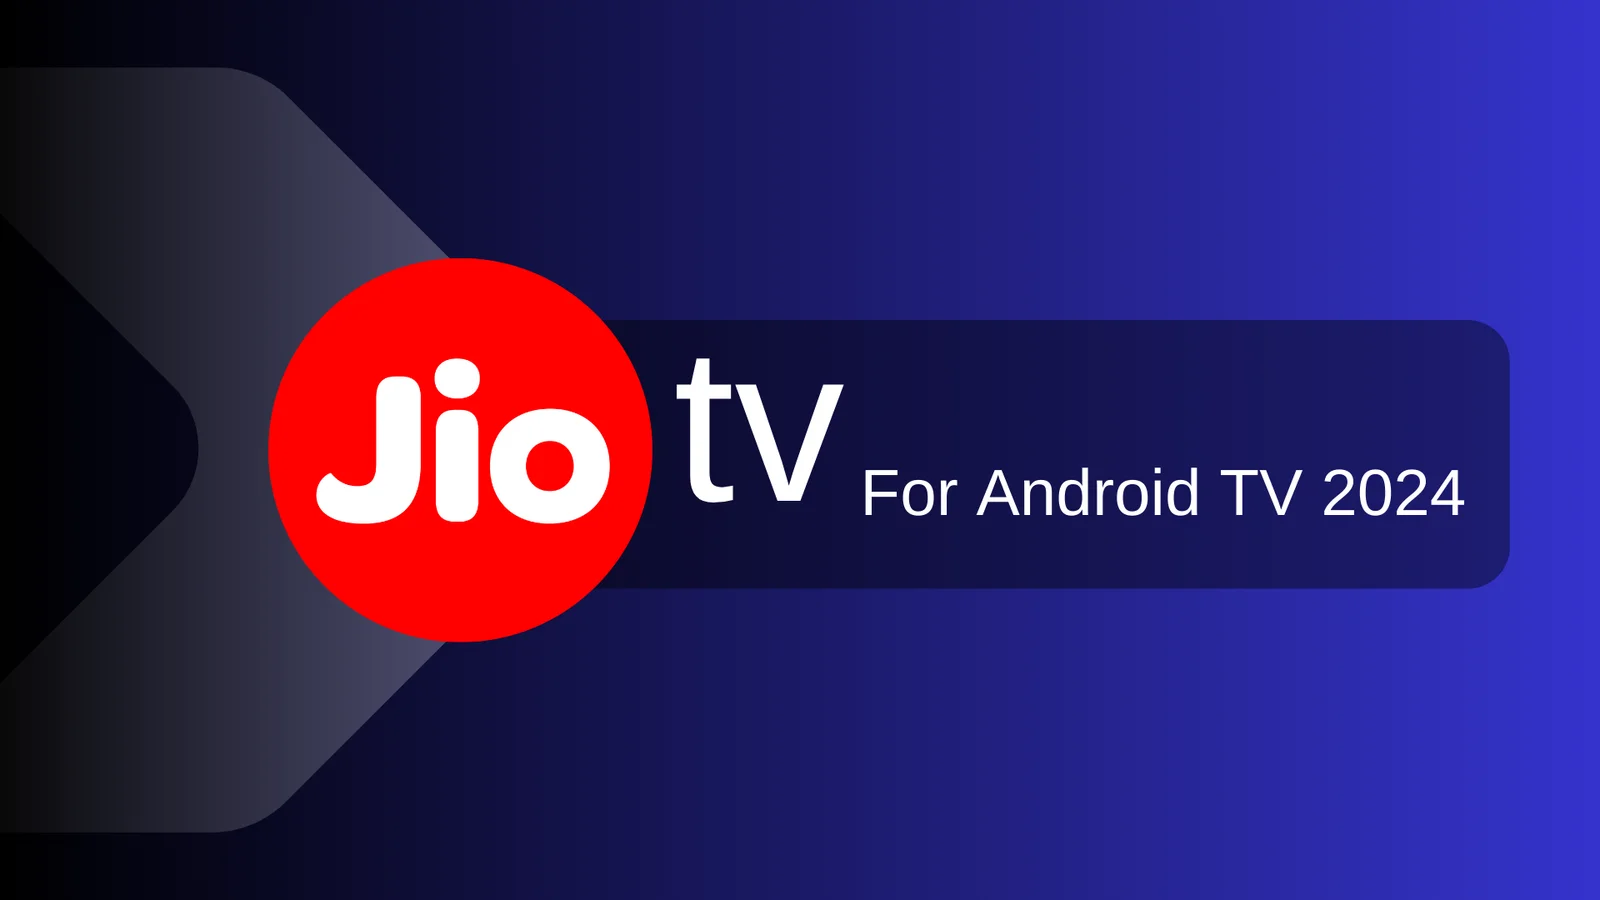 Steps to download Jio TV app and install in Android TV - 2024